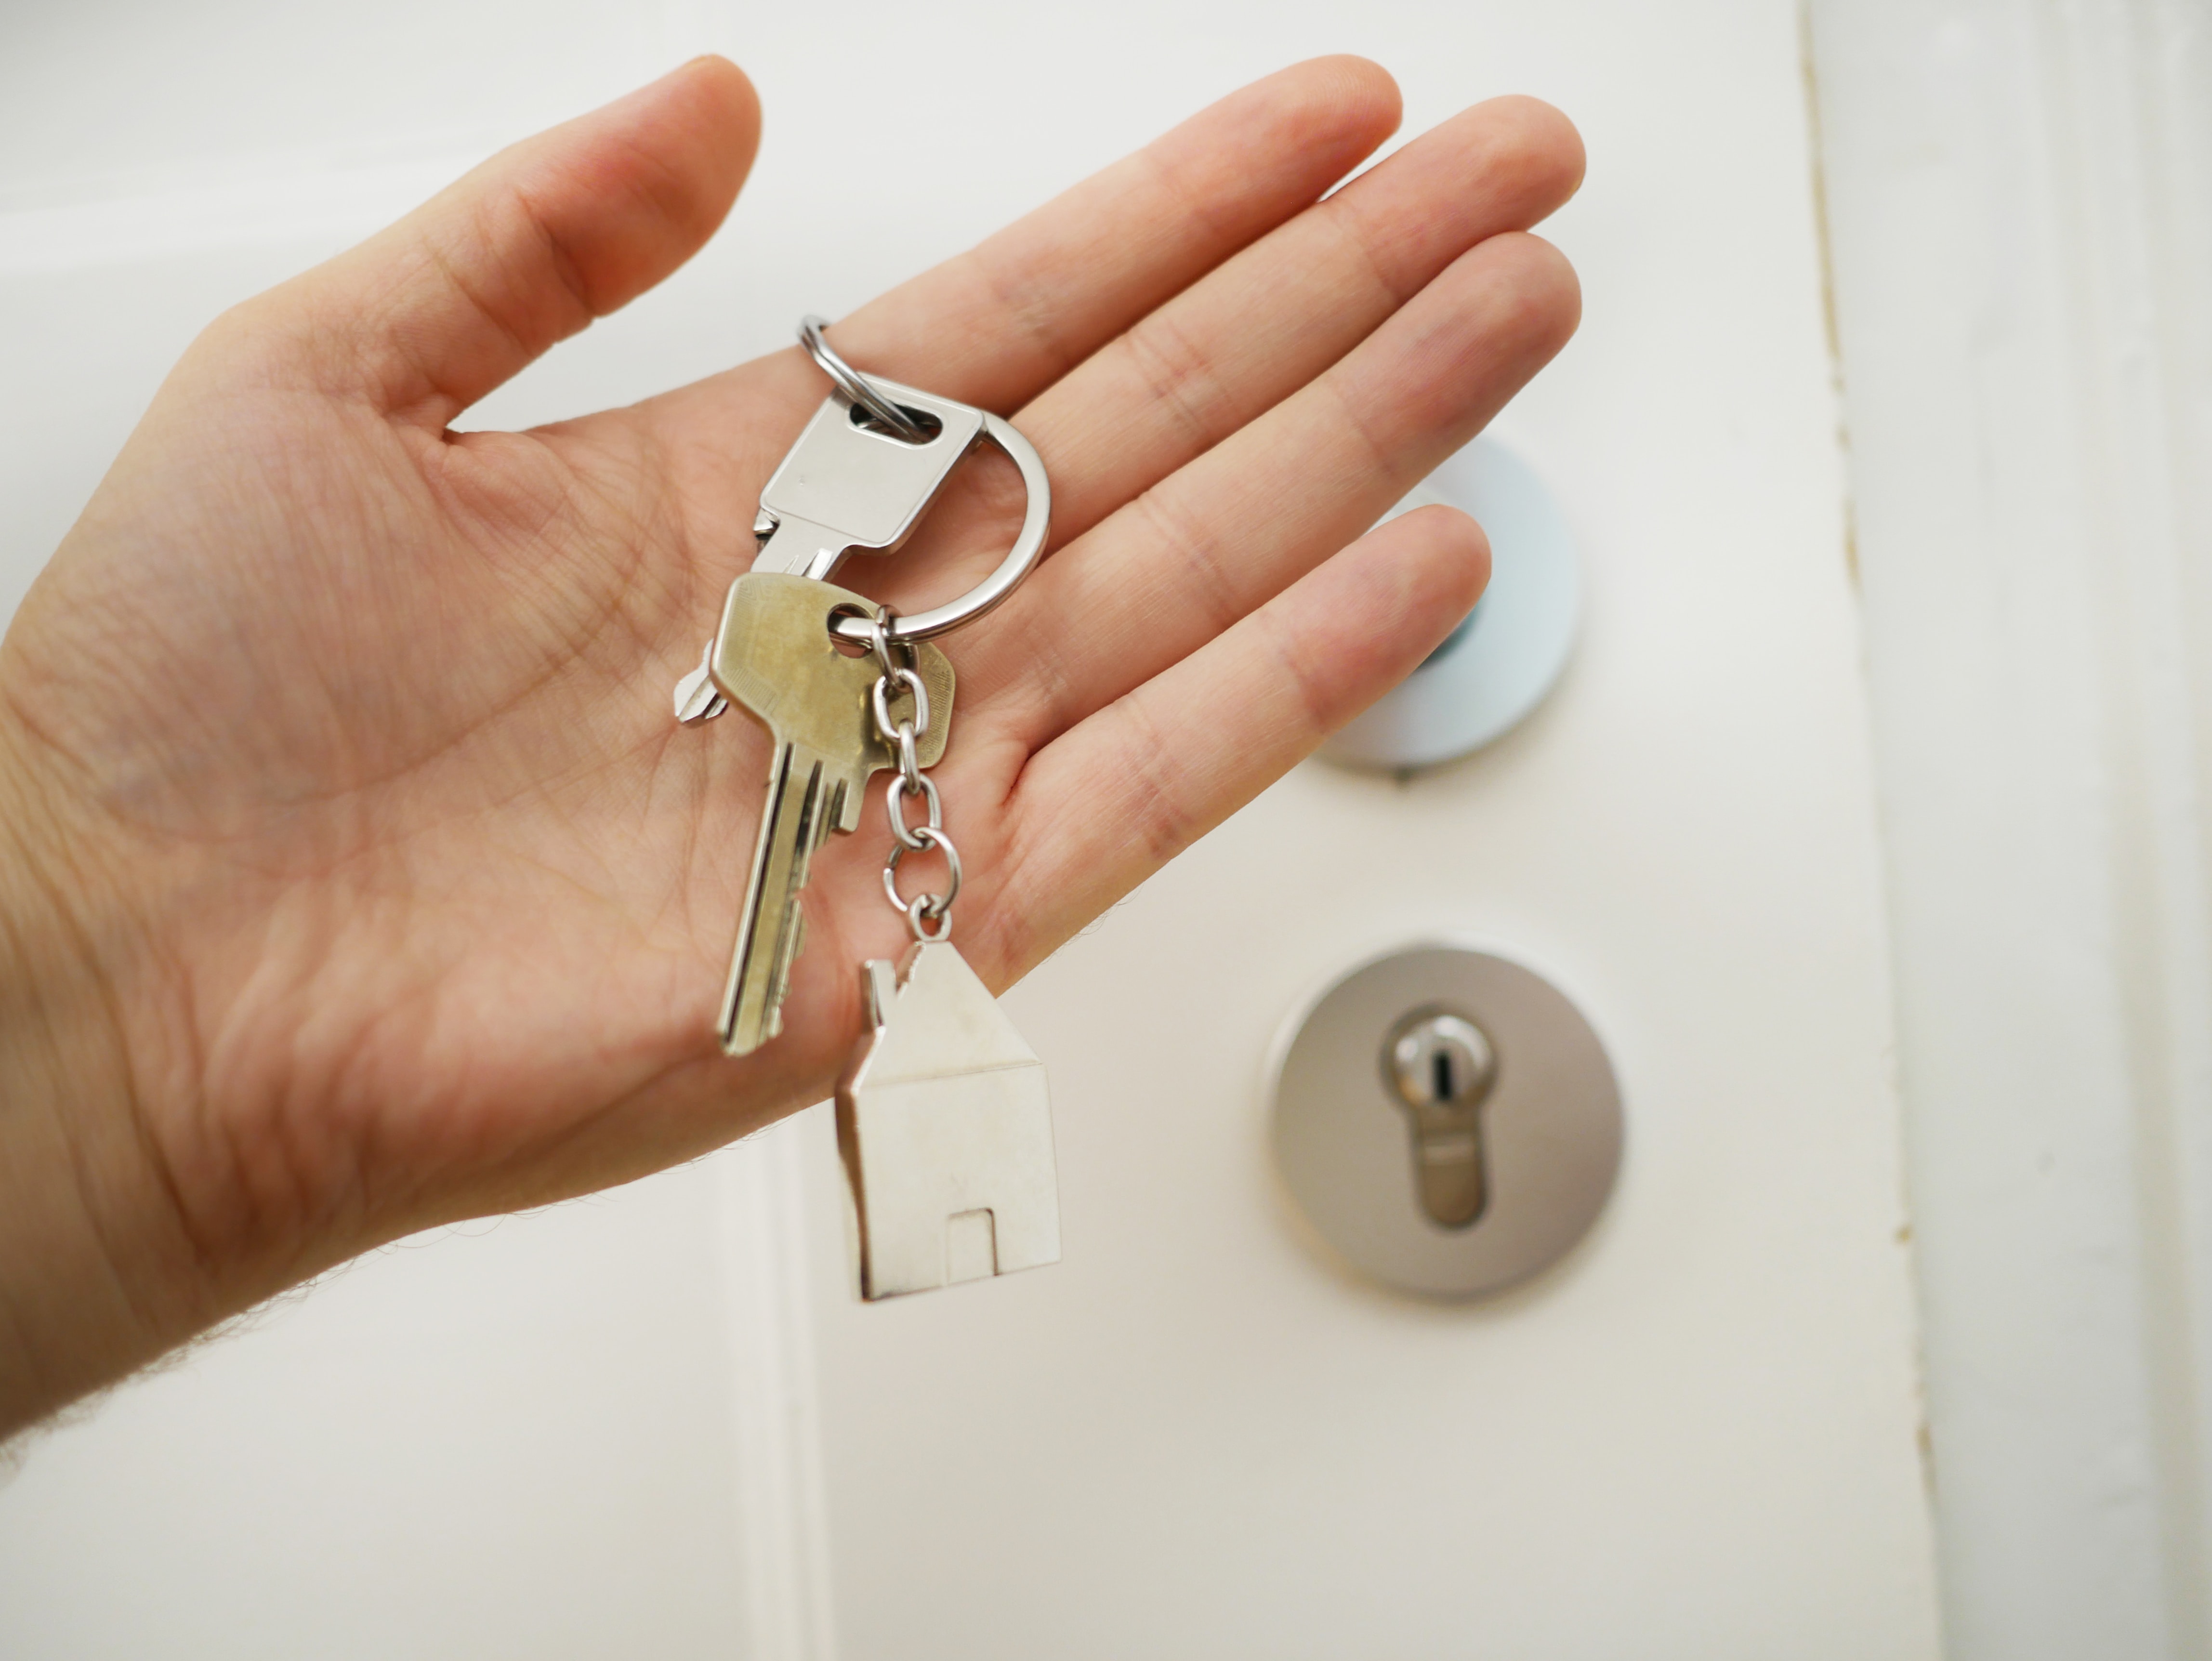 Landlord Access in a Rented Property